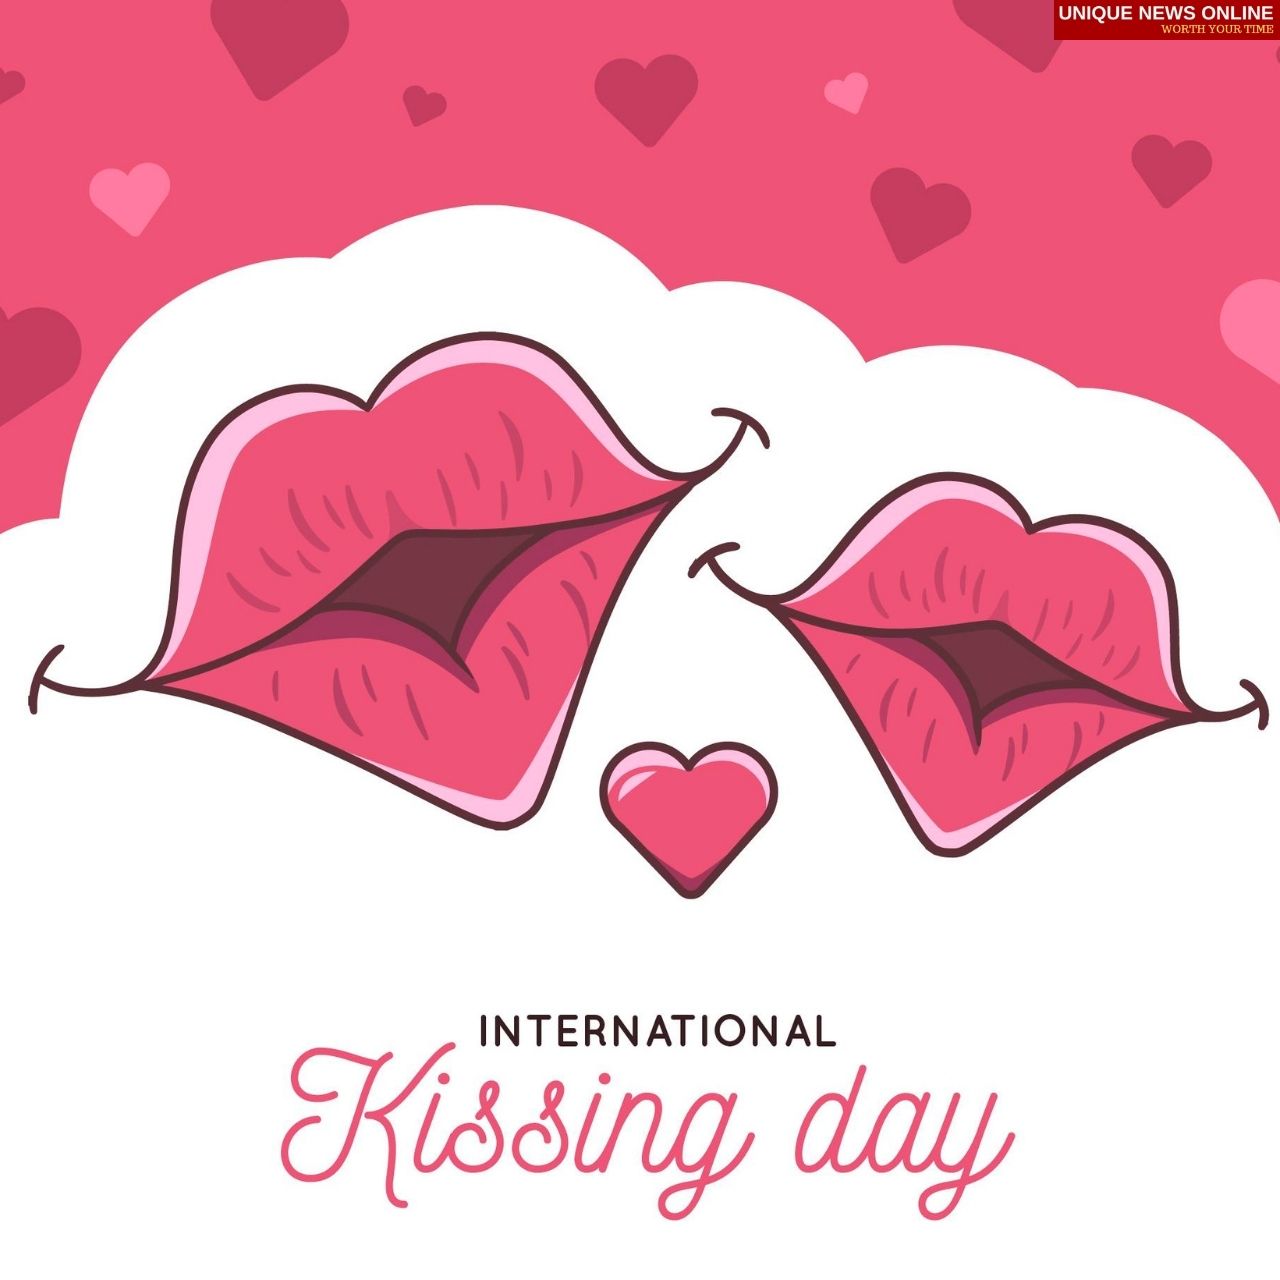 Happy World Kiss Day 2021: WhatsApp Status Video to Download for International Kissing Day